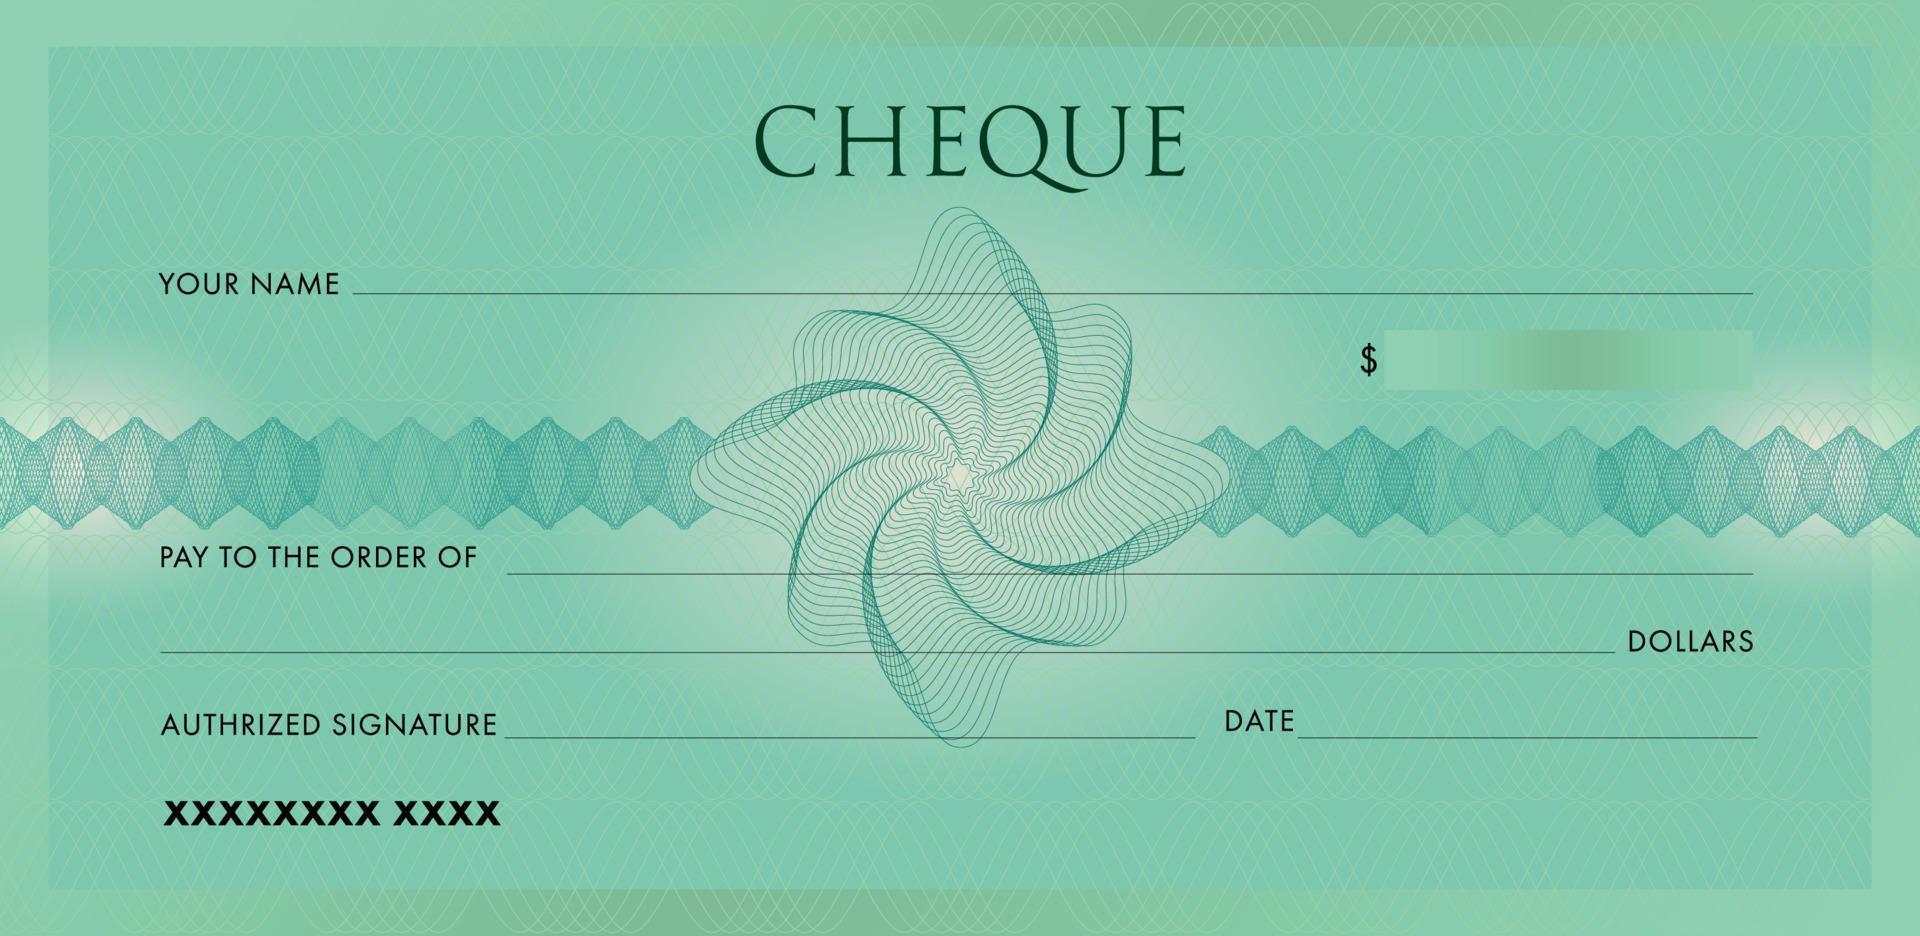 Green Cheque for Chequebook template. Linear Guilloche pattern with abstract watermark. Elegant background for banknote, money check, currency, bank note, Voucher, Gift certificate. Vector design.